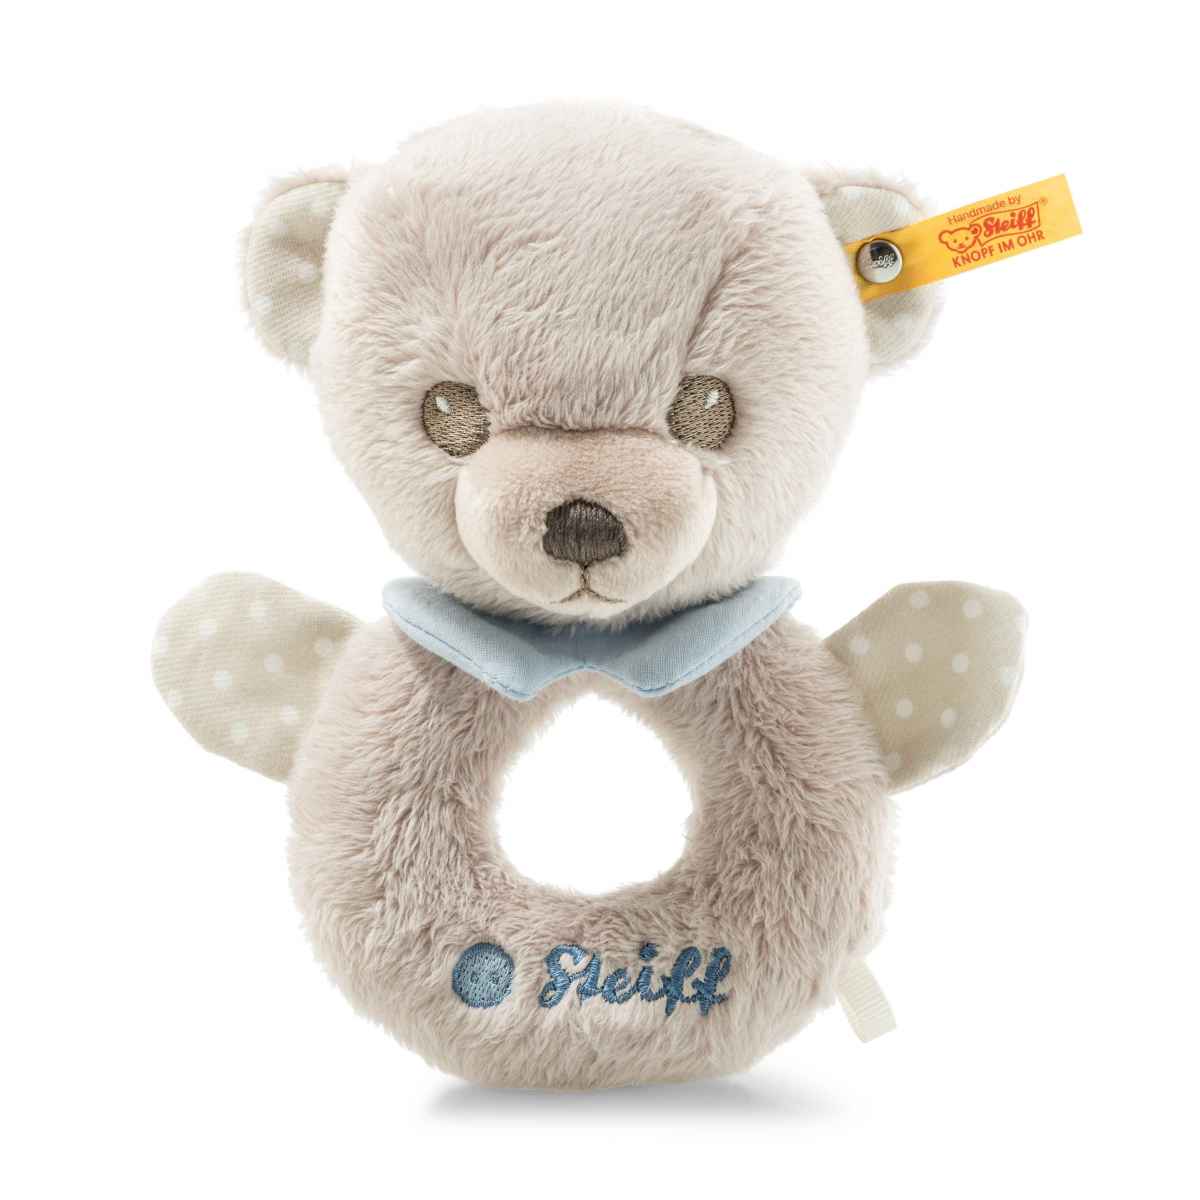 Погремушка Steiff Hello Baby Levi Teddy bear grip toy with rattle in gift box Штайф Мишка heavy gauge steel construction with cushion grip wall mounted can crusher with bottle opener 500ml can crusher for16oz and 12oz